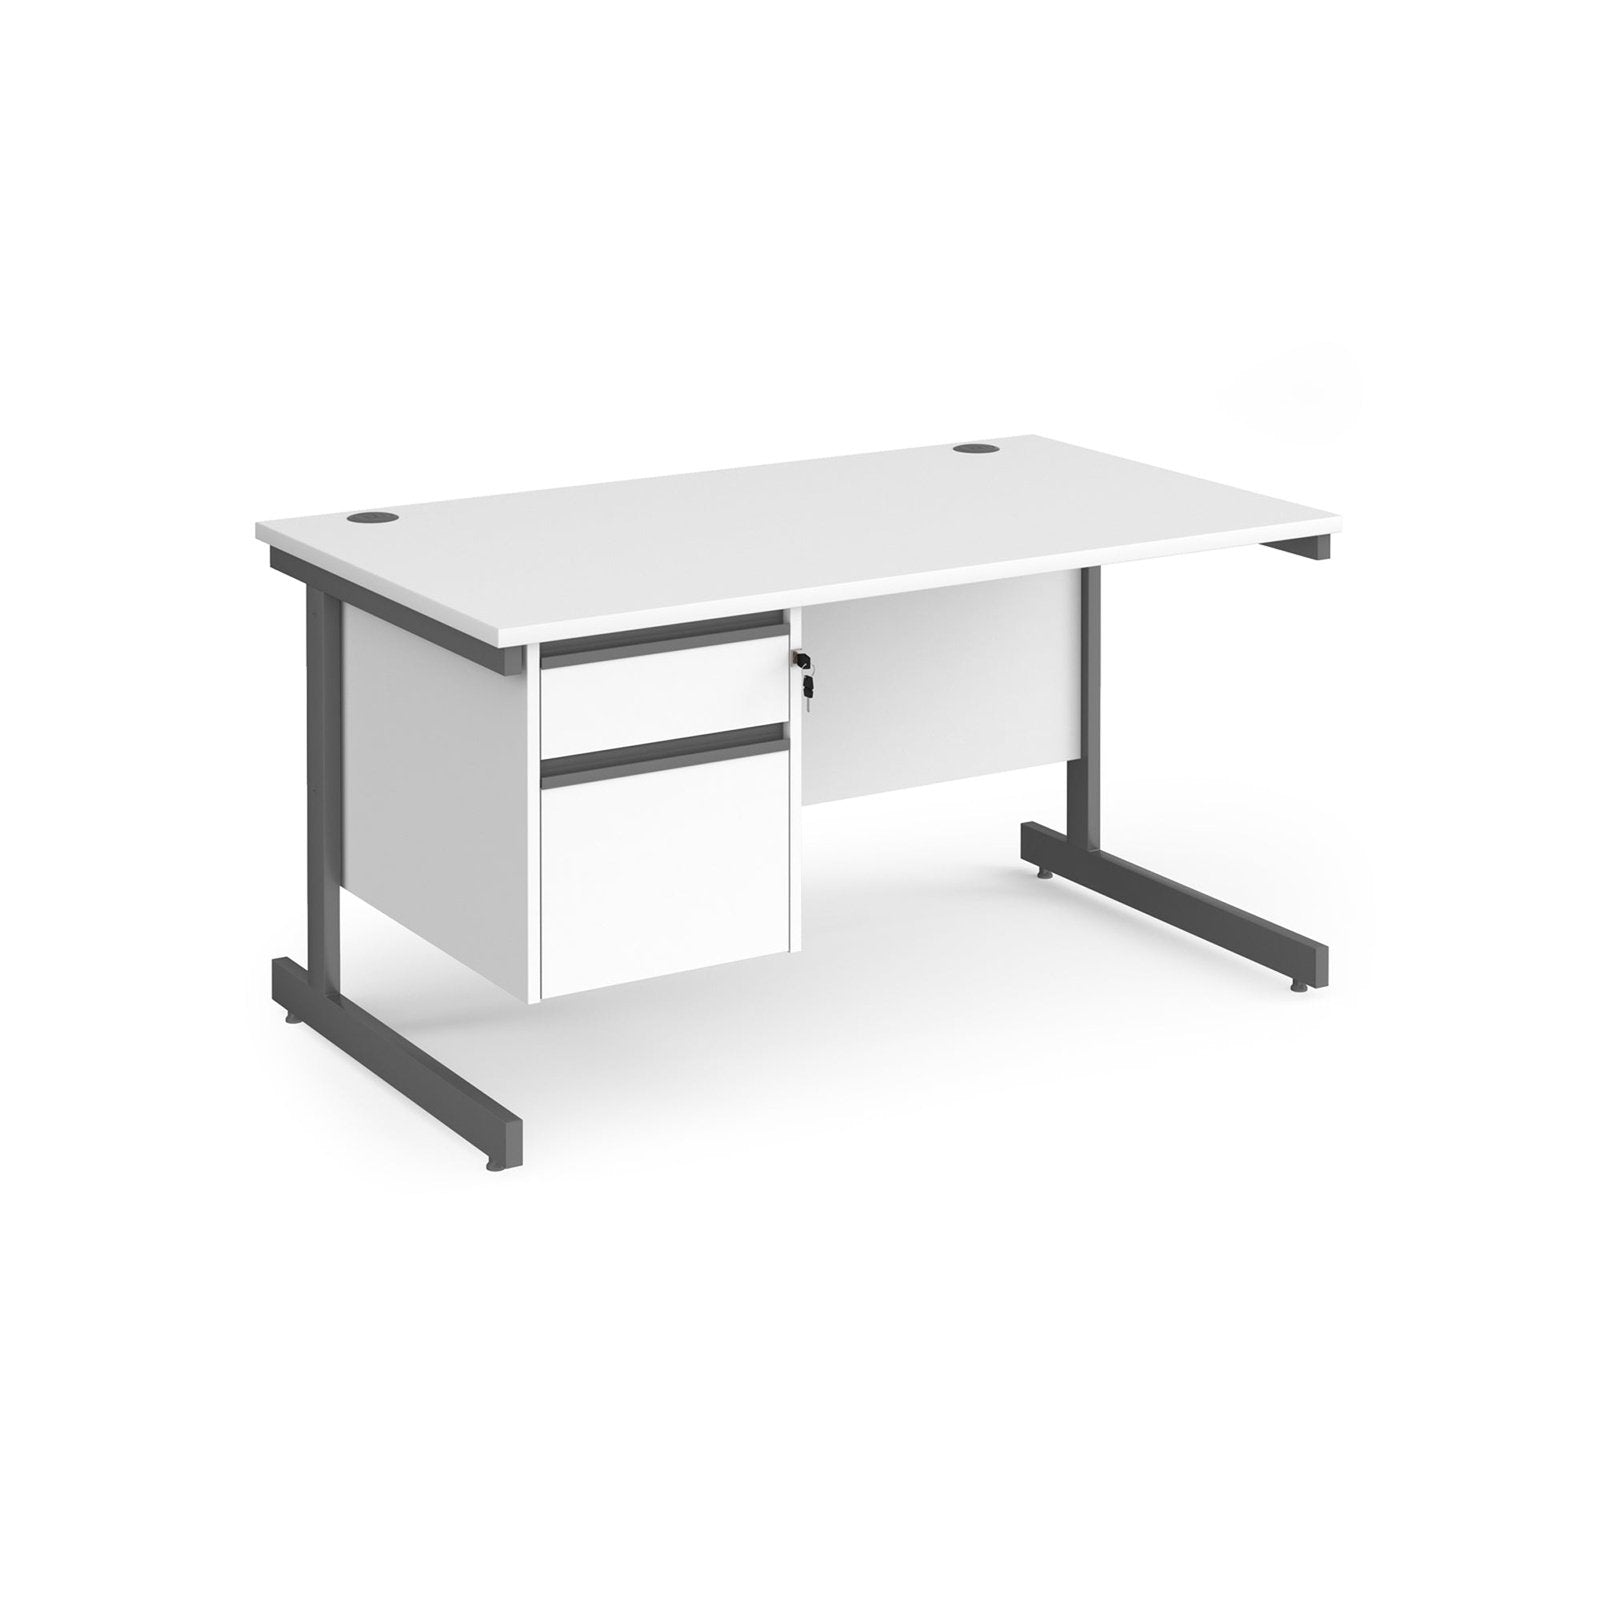 Contract 25 straight desk with 2 drawer pedestsl and cantilever leg - Office Products Online